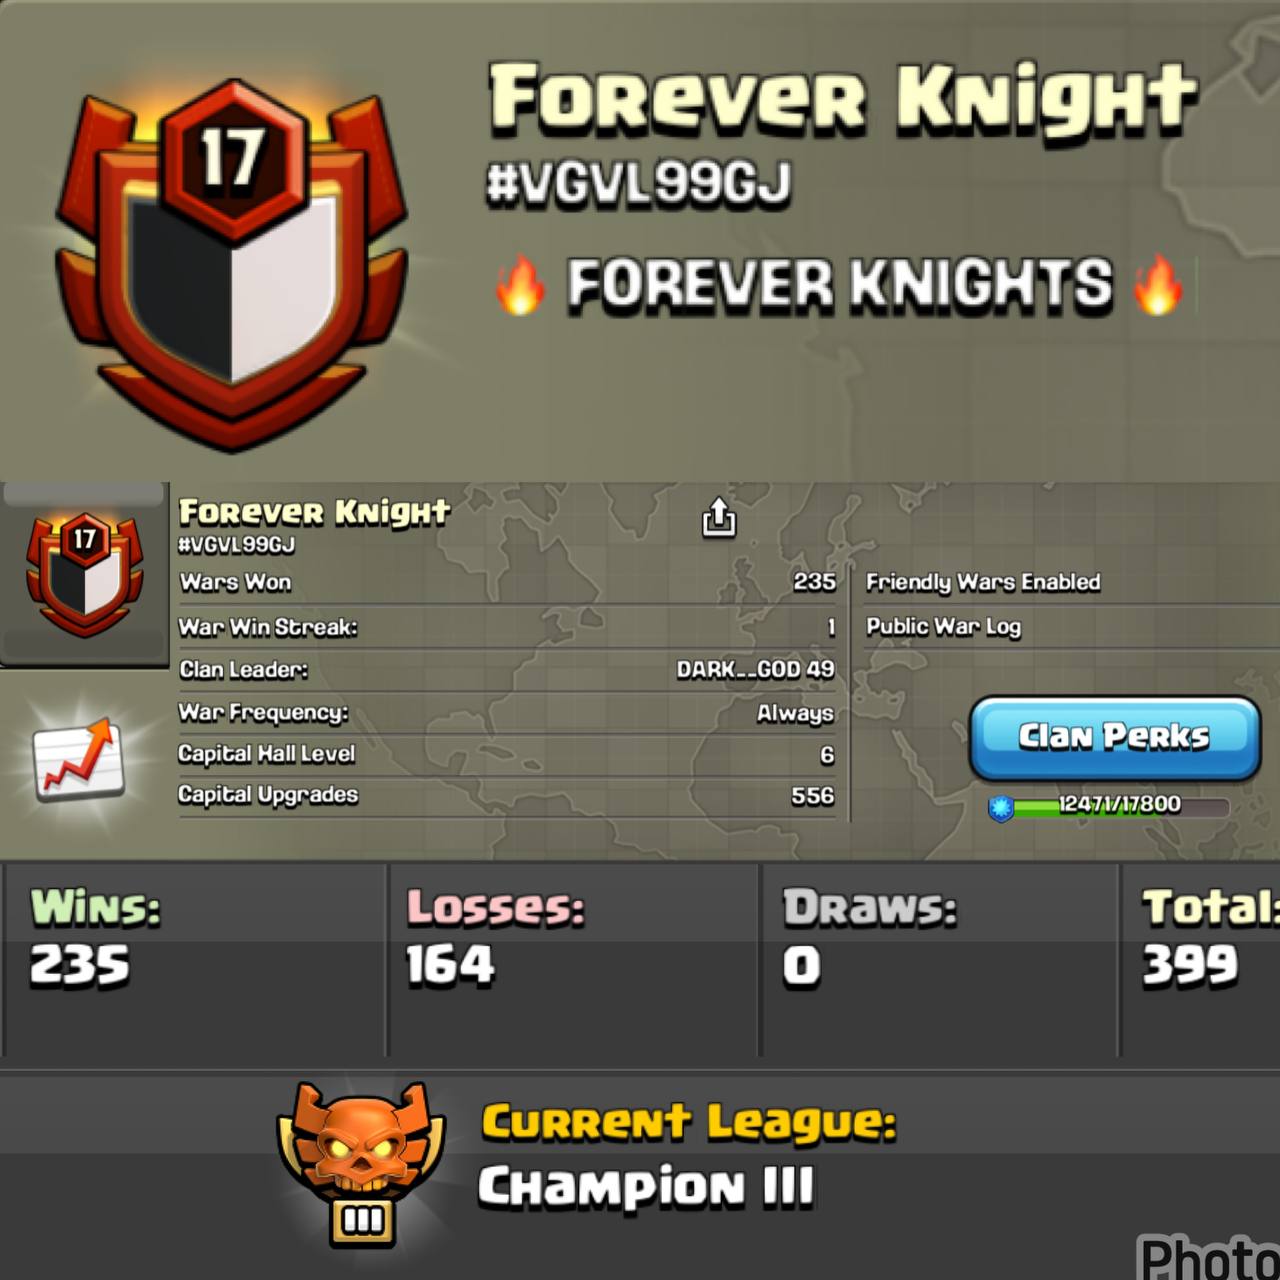 LEVEL - 17.8  | NAME - FOREVER KNIGHT l LEAGUE - CHAMPION 3 | CC - 6| ENGLISH NAME | WAR LOG - 235 : 164 | AMAZING NAME & LOG | INSTANT DELIVERY